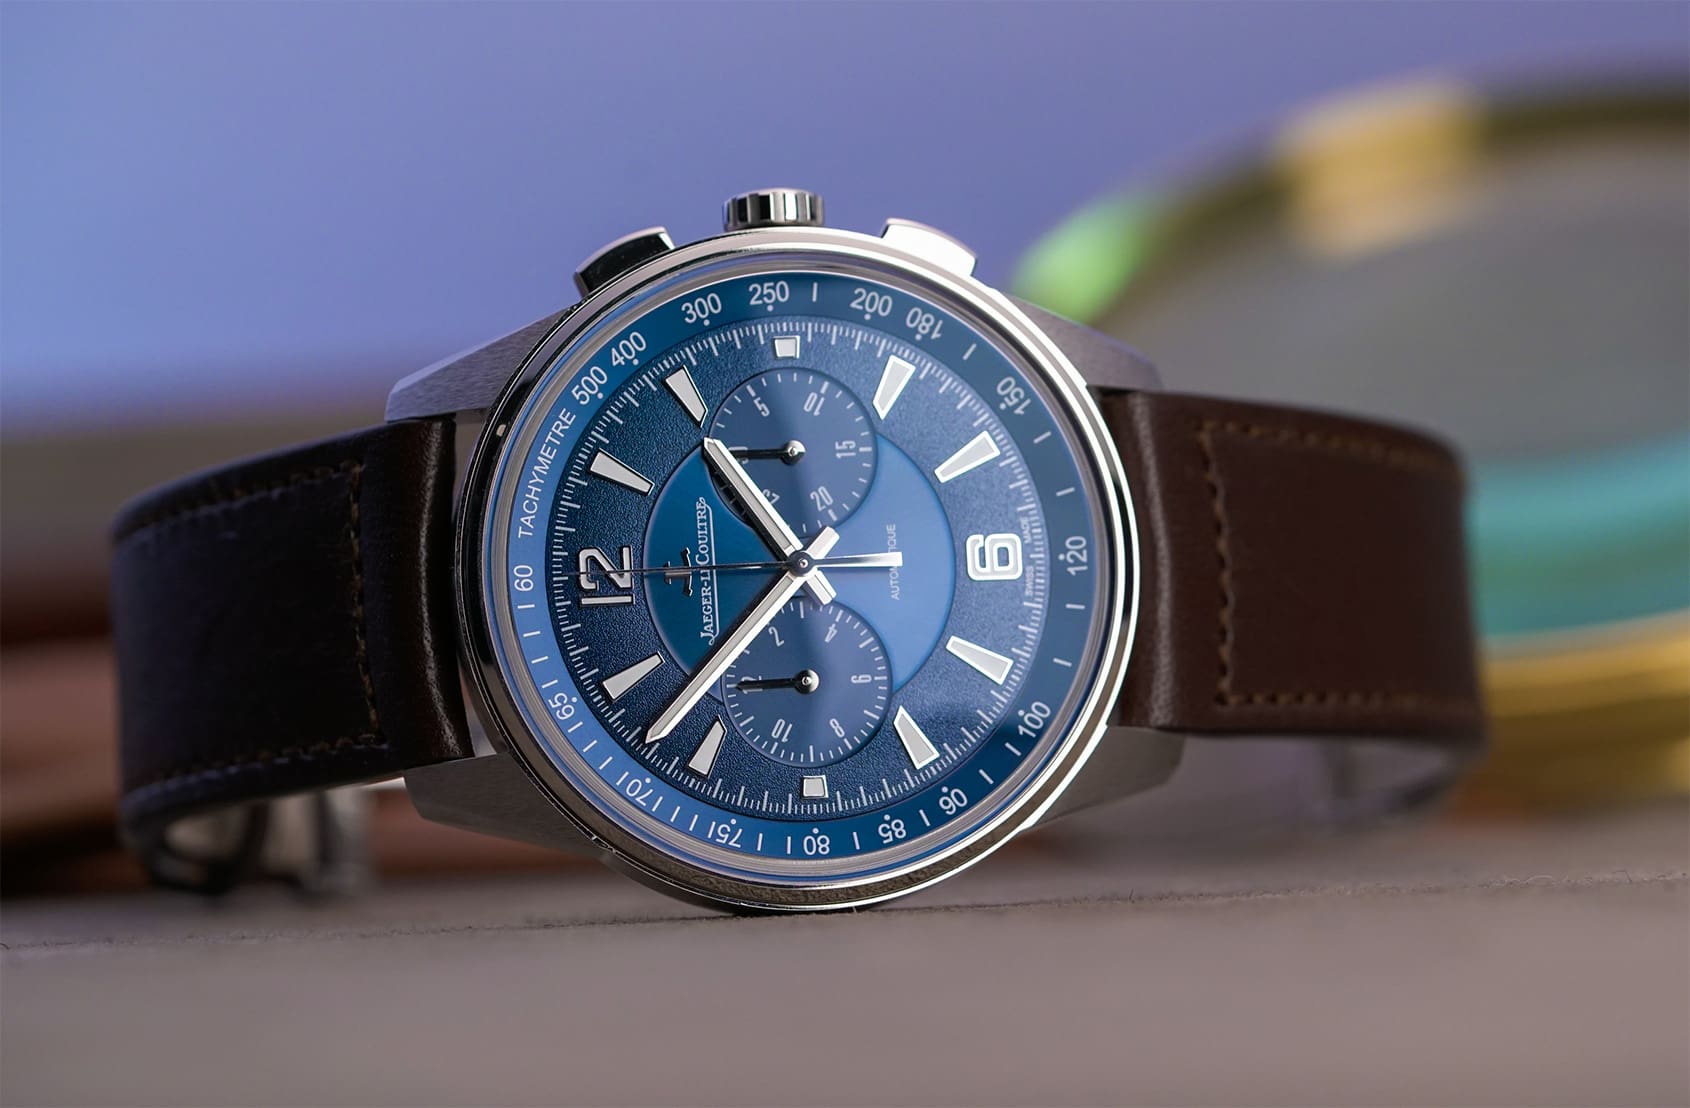 HANDS-ON: The Jaeger-LeCoultre Polaris Chronograph – sporty, steel and oh-so stylish